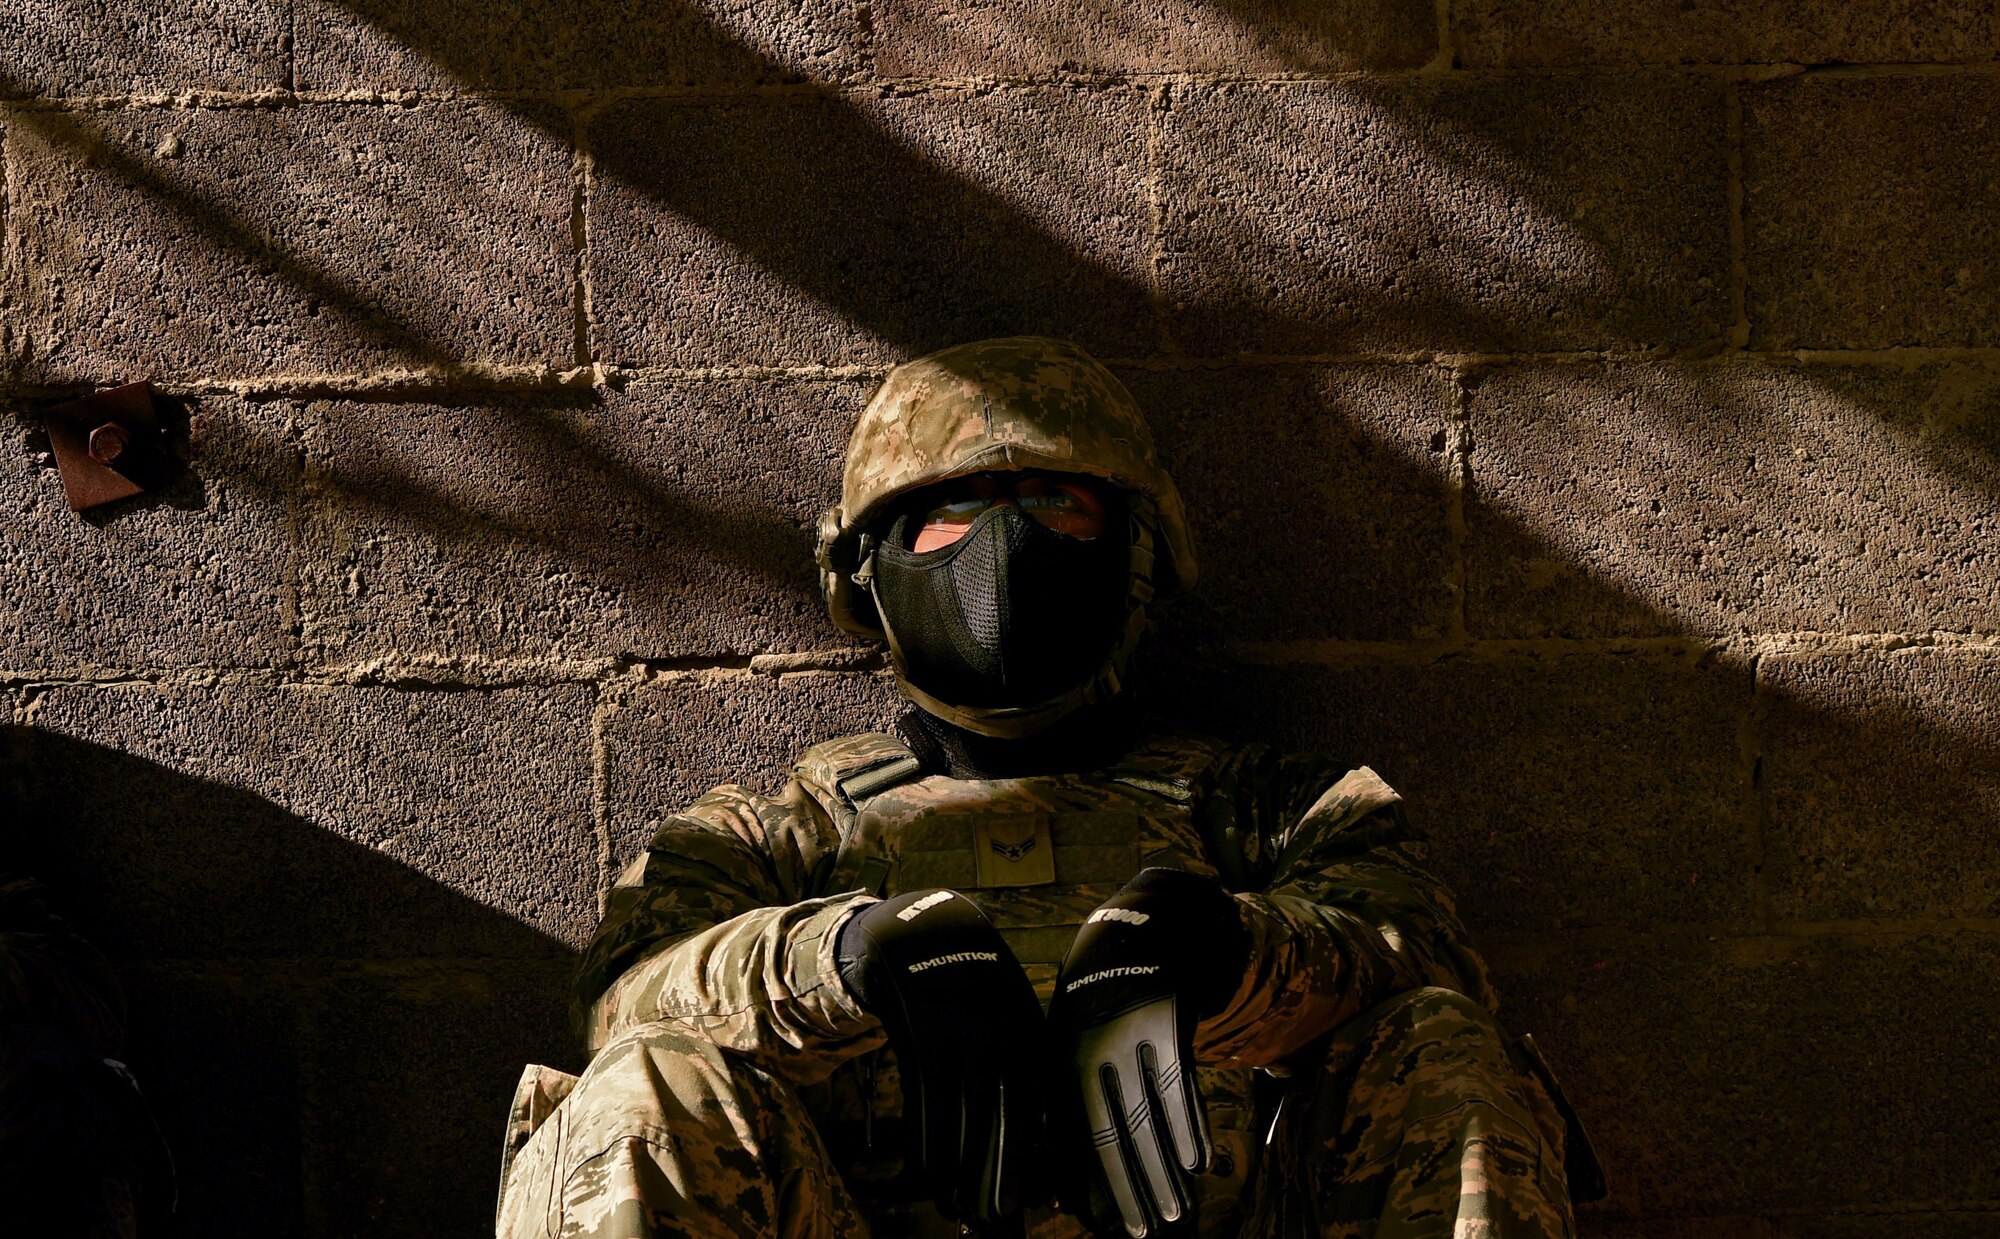 An Airman assigned to the 799th Security Forces Squadron rests after becoming a casualty during a simulated combat scenario, Oct. 21, 2016, at Range 63C, Silver Flag Alpha, Nev. The Airmen were tasked with planning and carrying out specific operation orders while mitigating collateral damage and neutralizing all opposing forces. (U.S. Air Force photo by Airman 1st Class James Thompson)